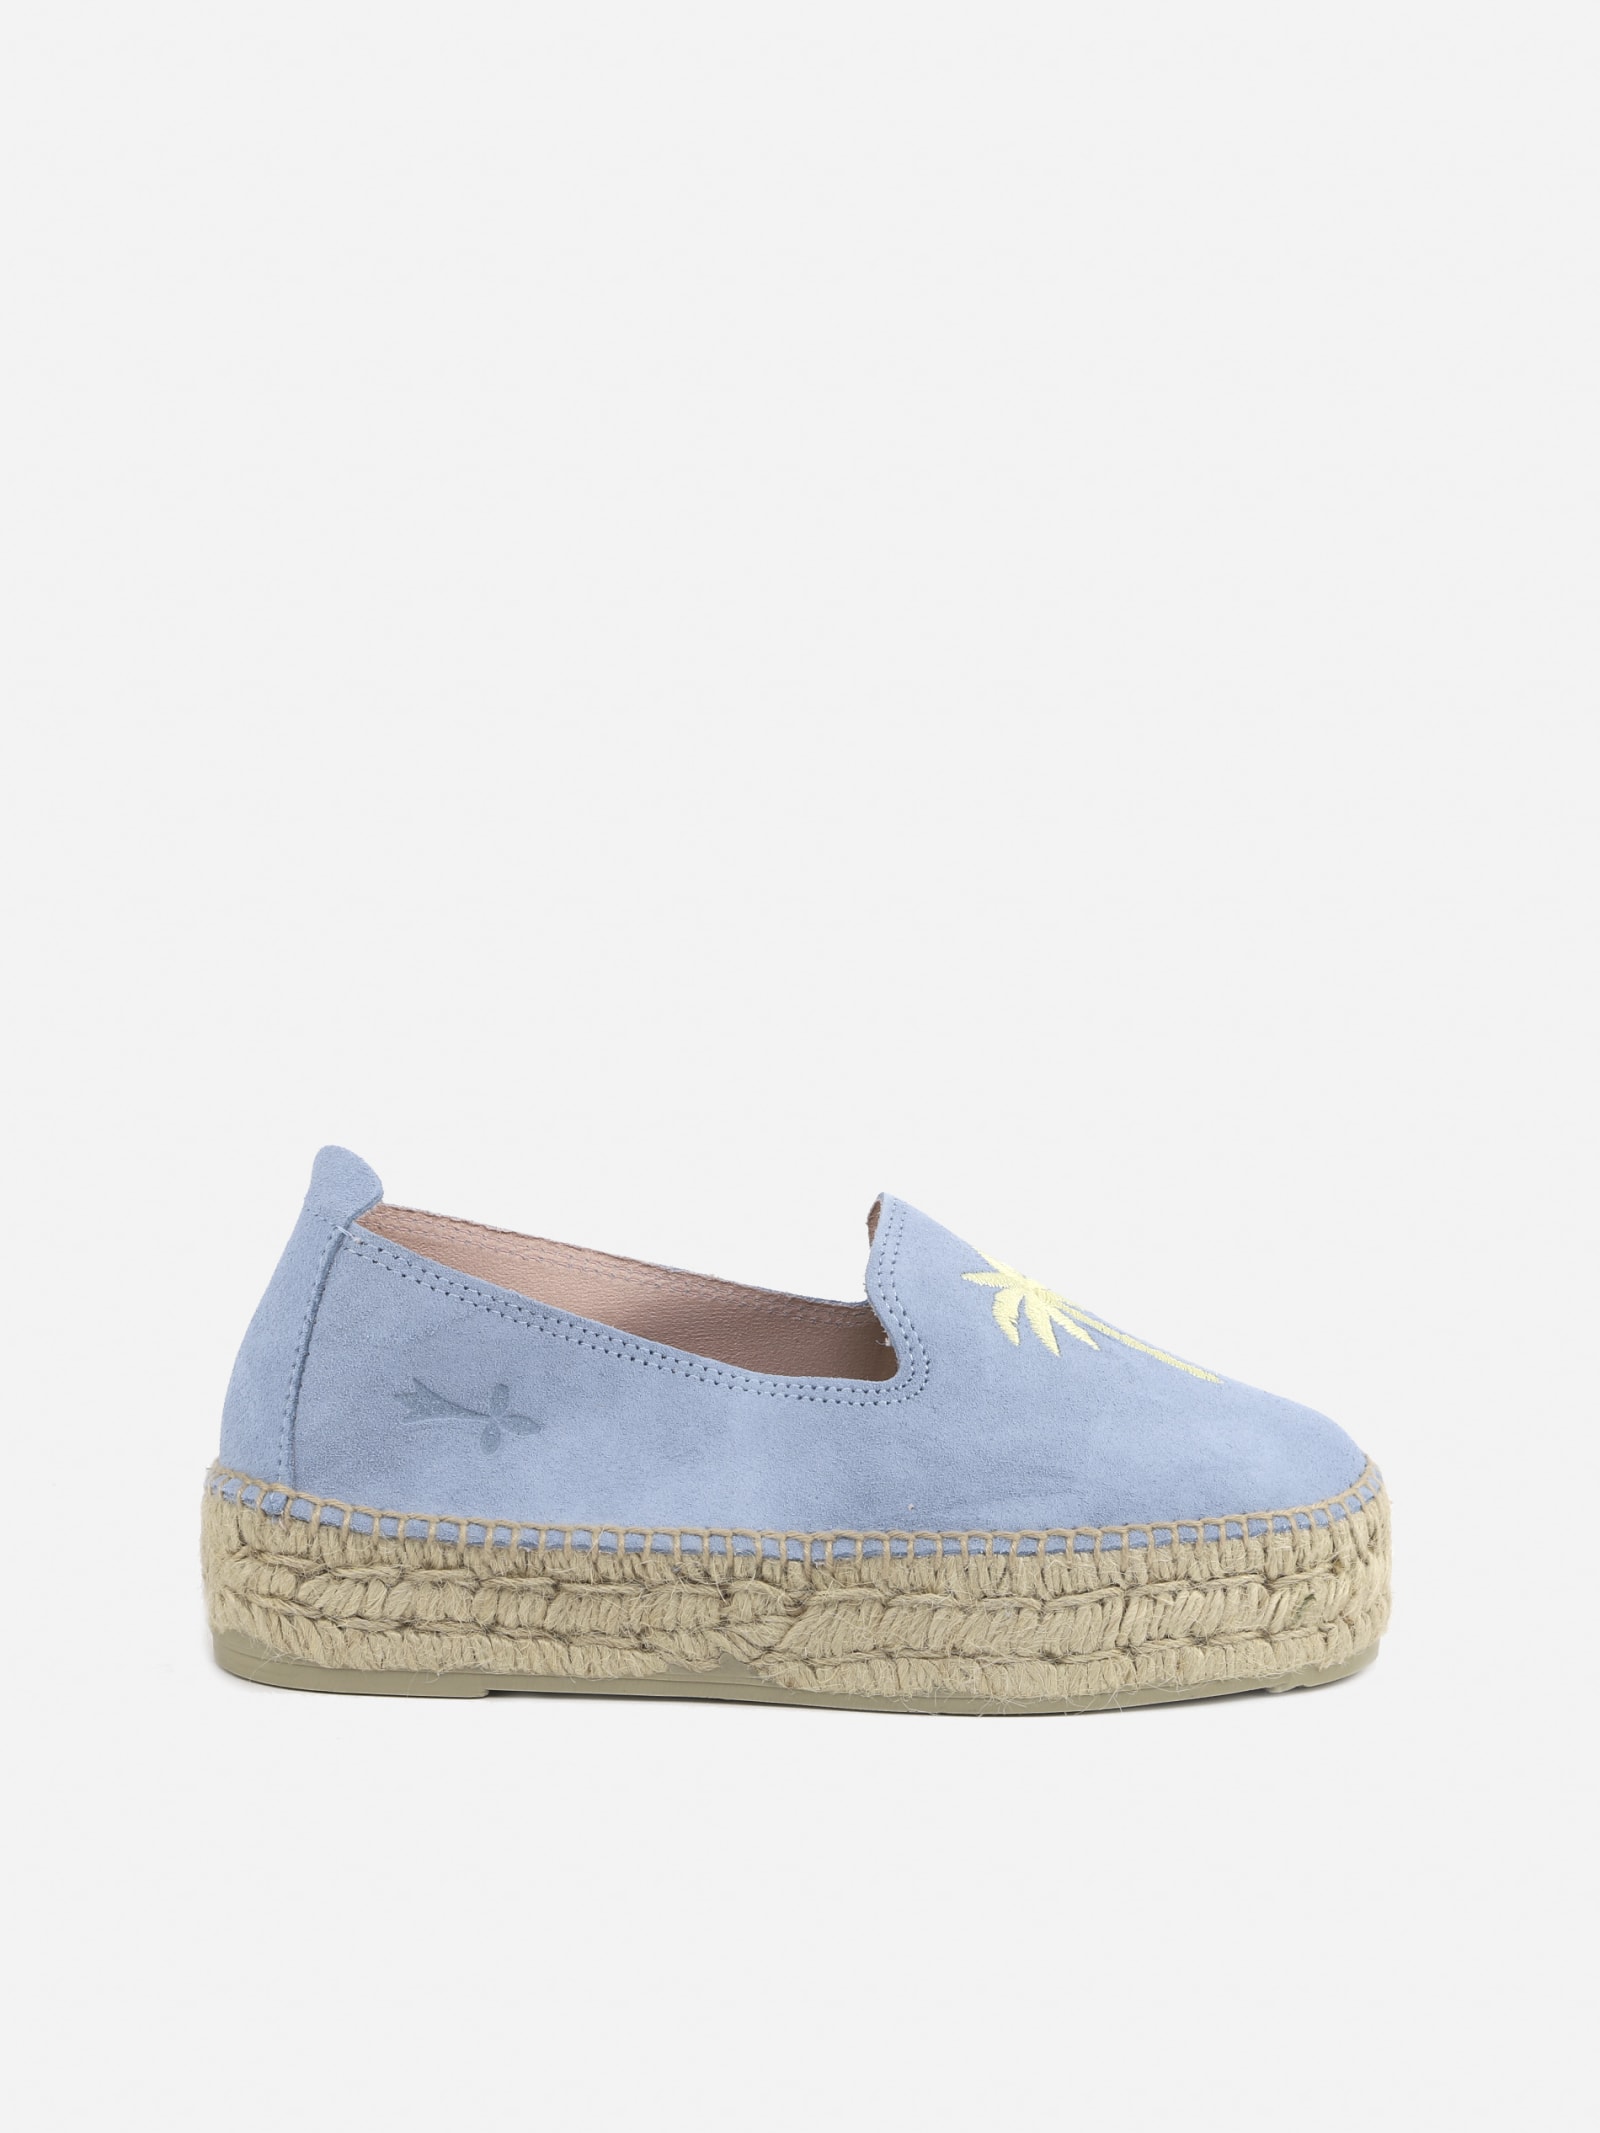 Manebi Suede Espadrilles With Embroidered Motif